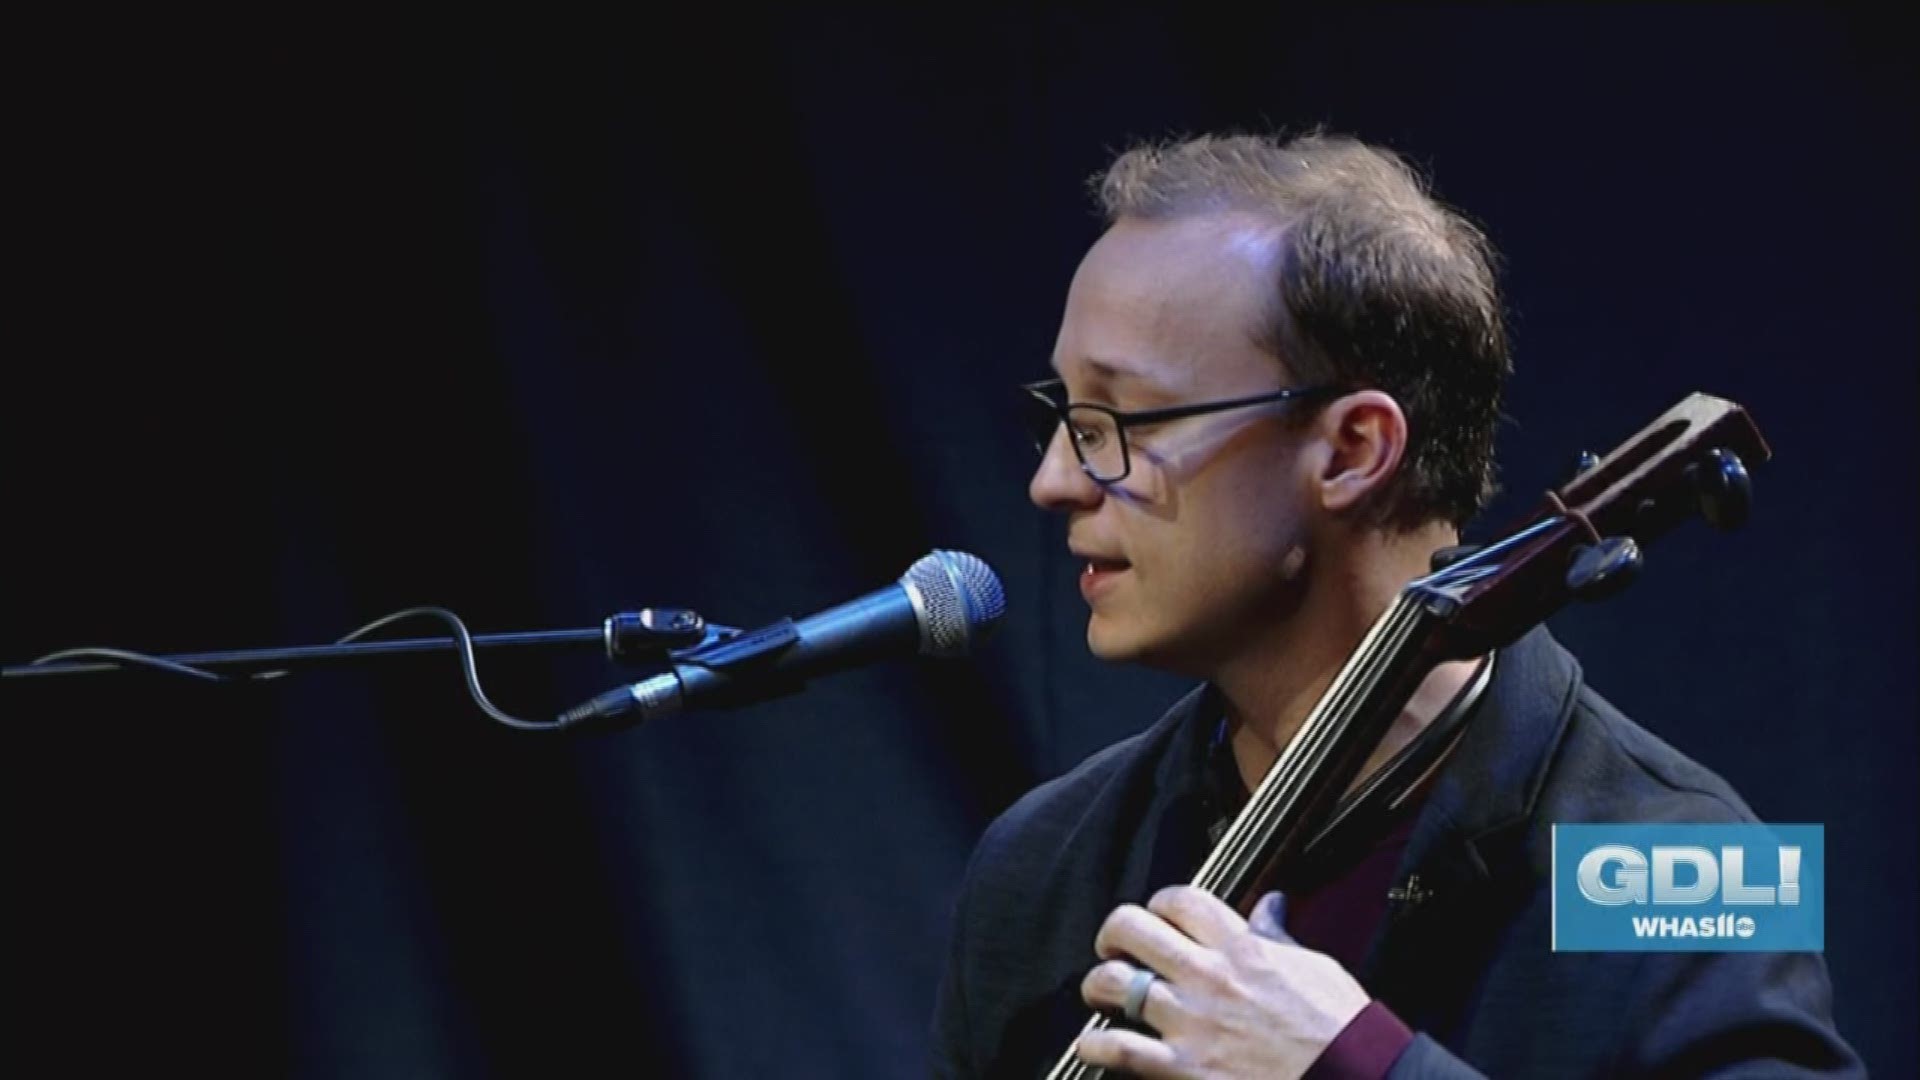 Ben Sollee will host "Kentucky USA" starting Nov. 13 at 8 PM at the Kentucky Center. Tickets are available online at KentuckyCenter.org.